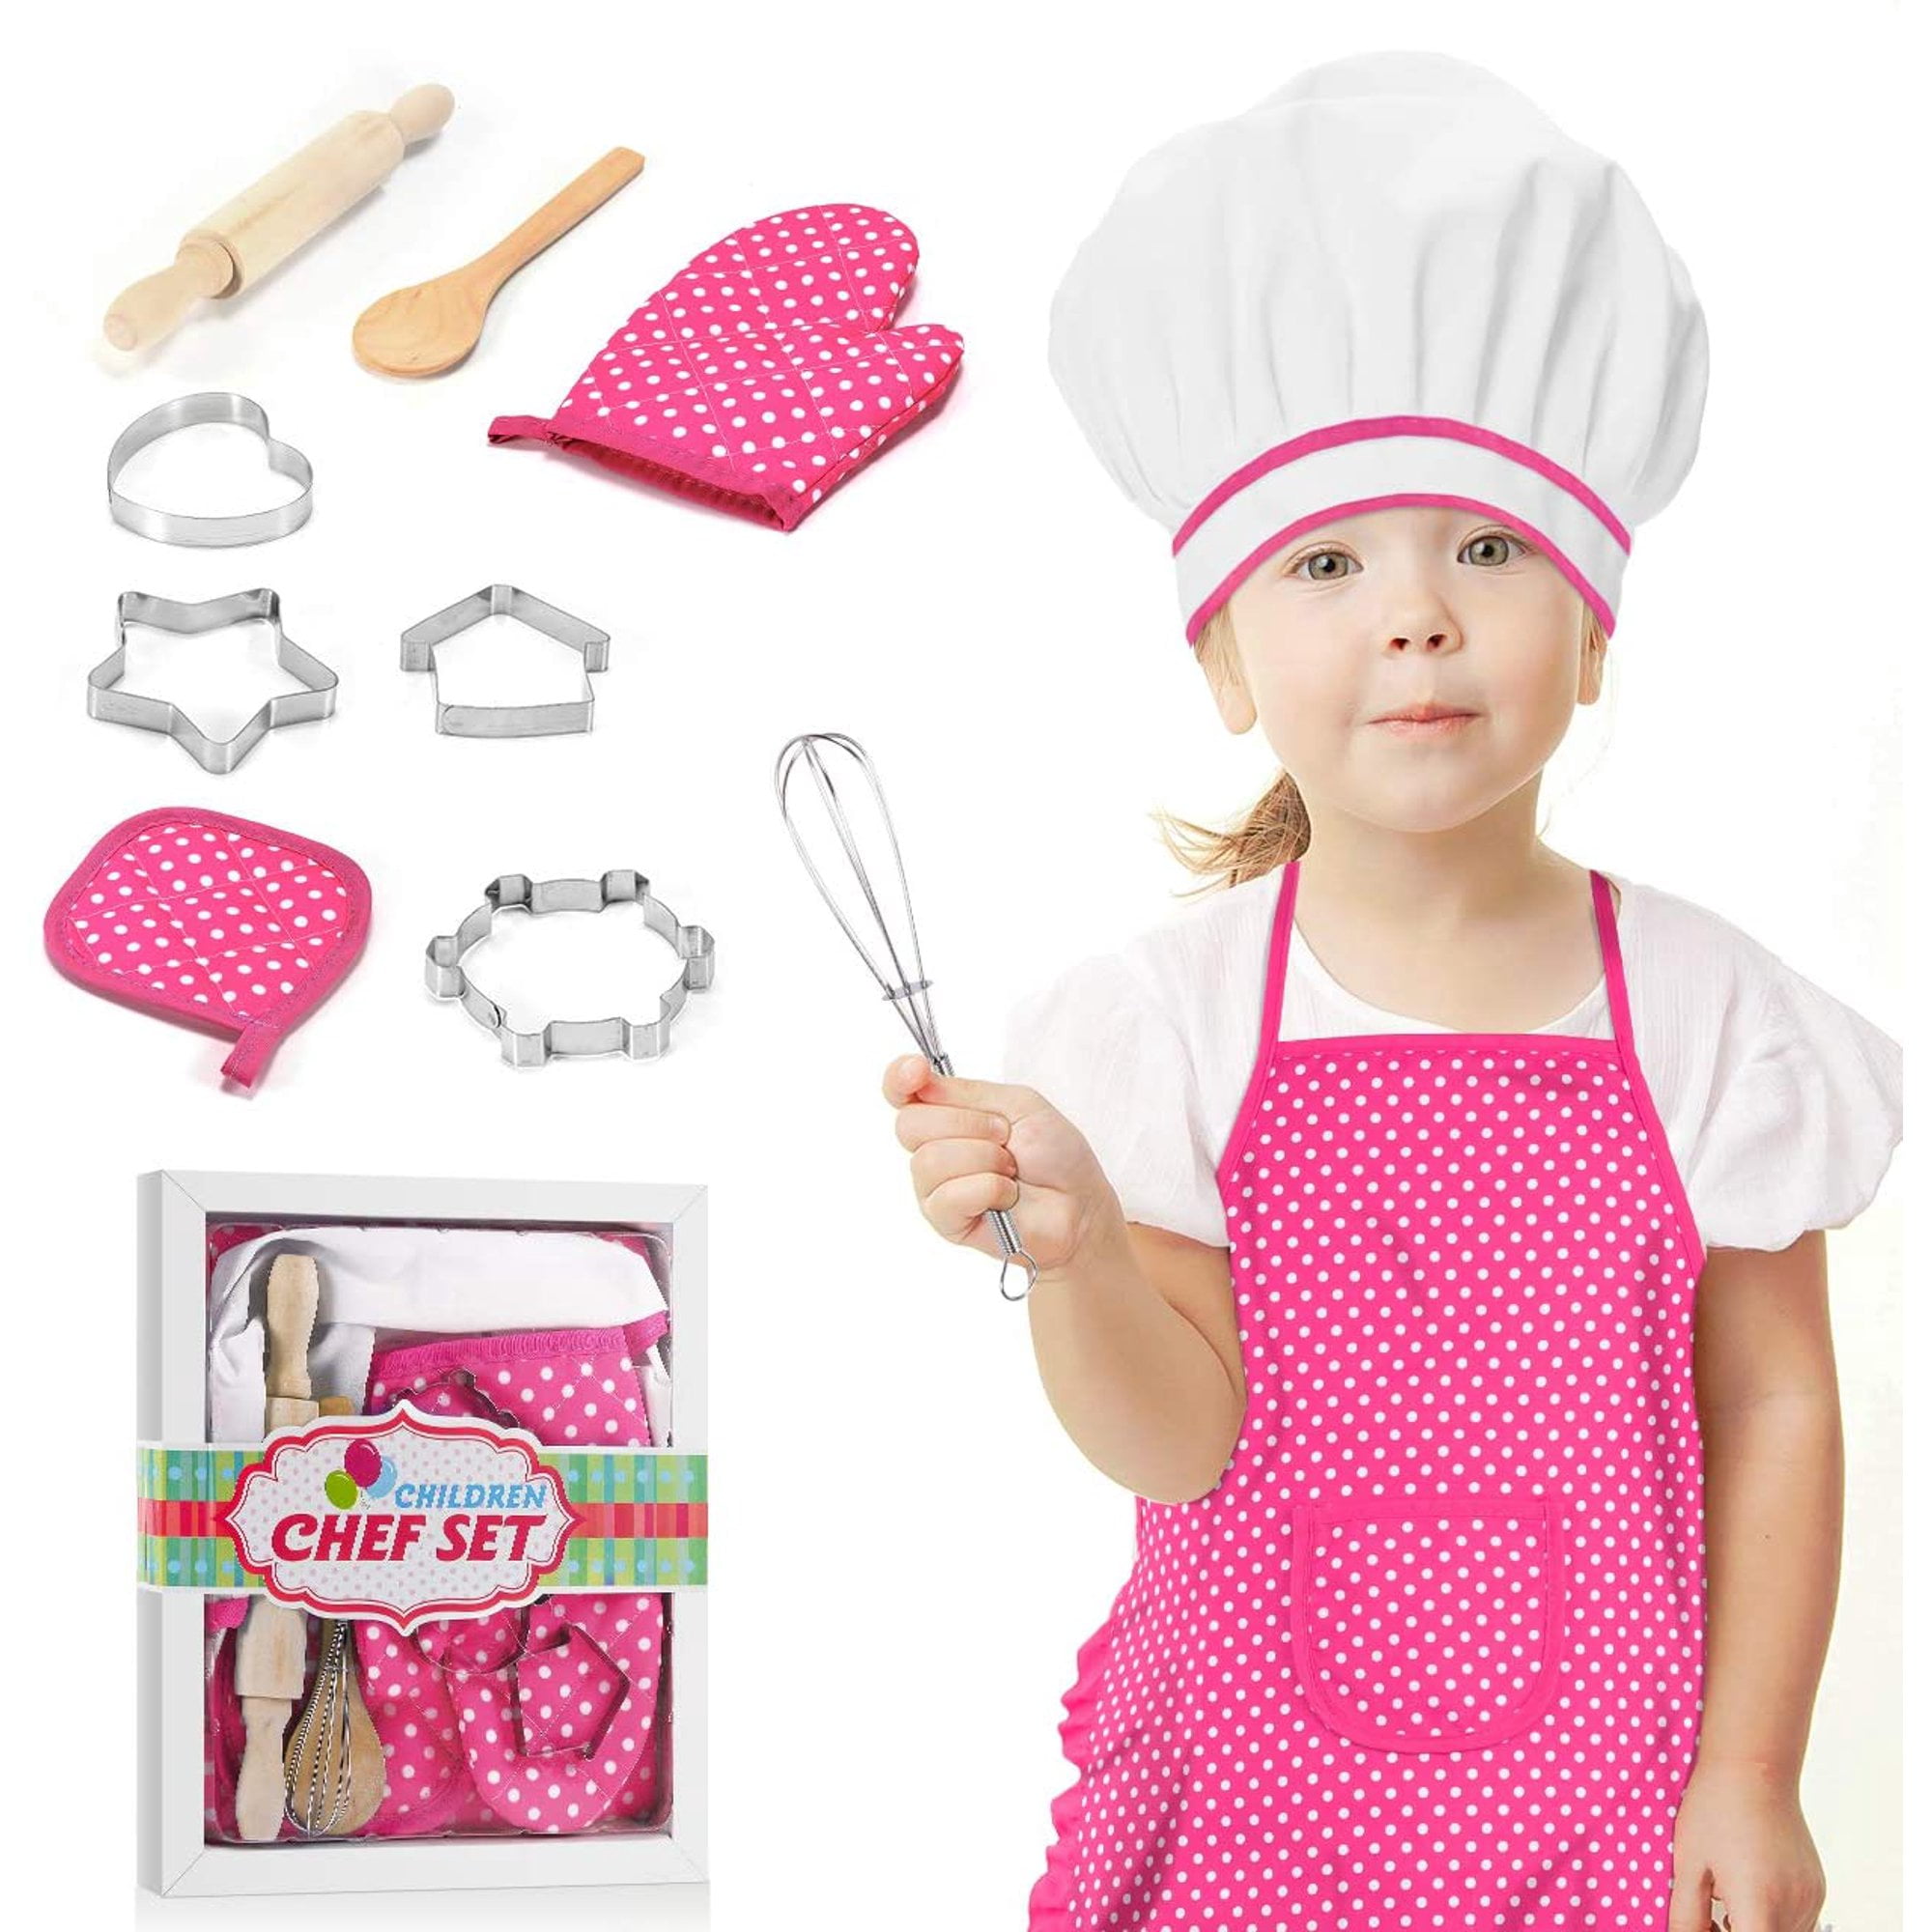 Chef Hat 11 PCS Cook Costume Cooking Play Set with Apron #2 DesignerBox Chef Set for Kids Cooking Mitt and Cookie Cutters for Boys Career Role Play Children Pretend Play Birthday Gift